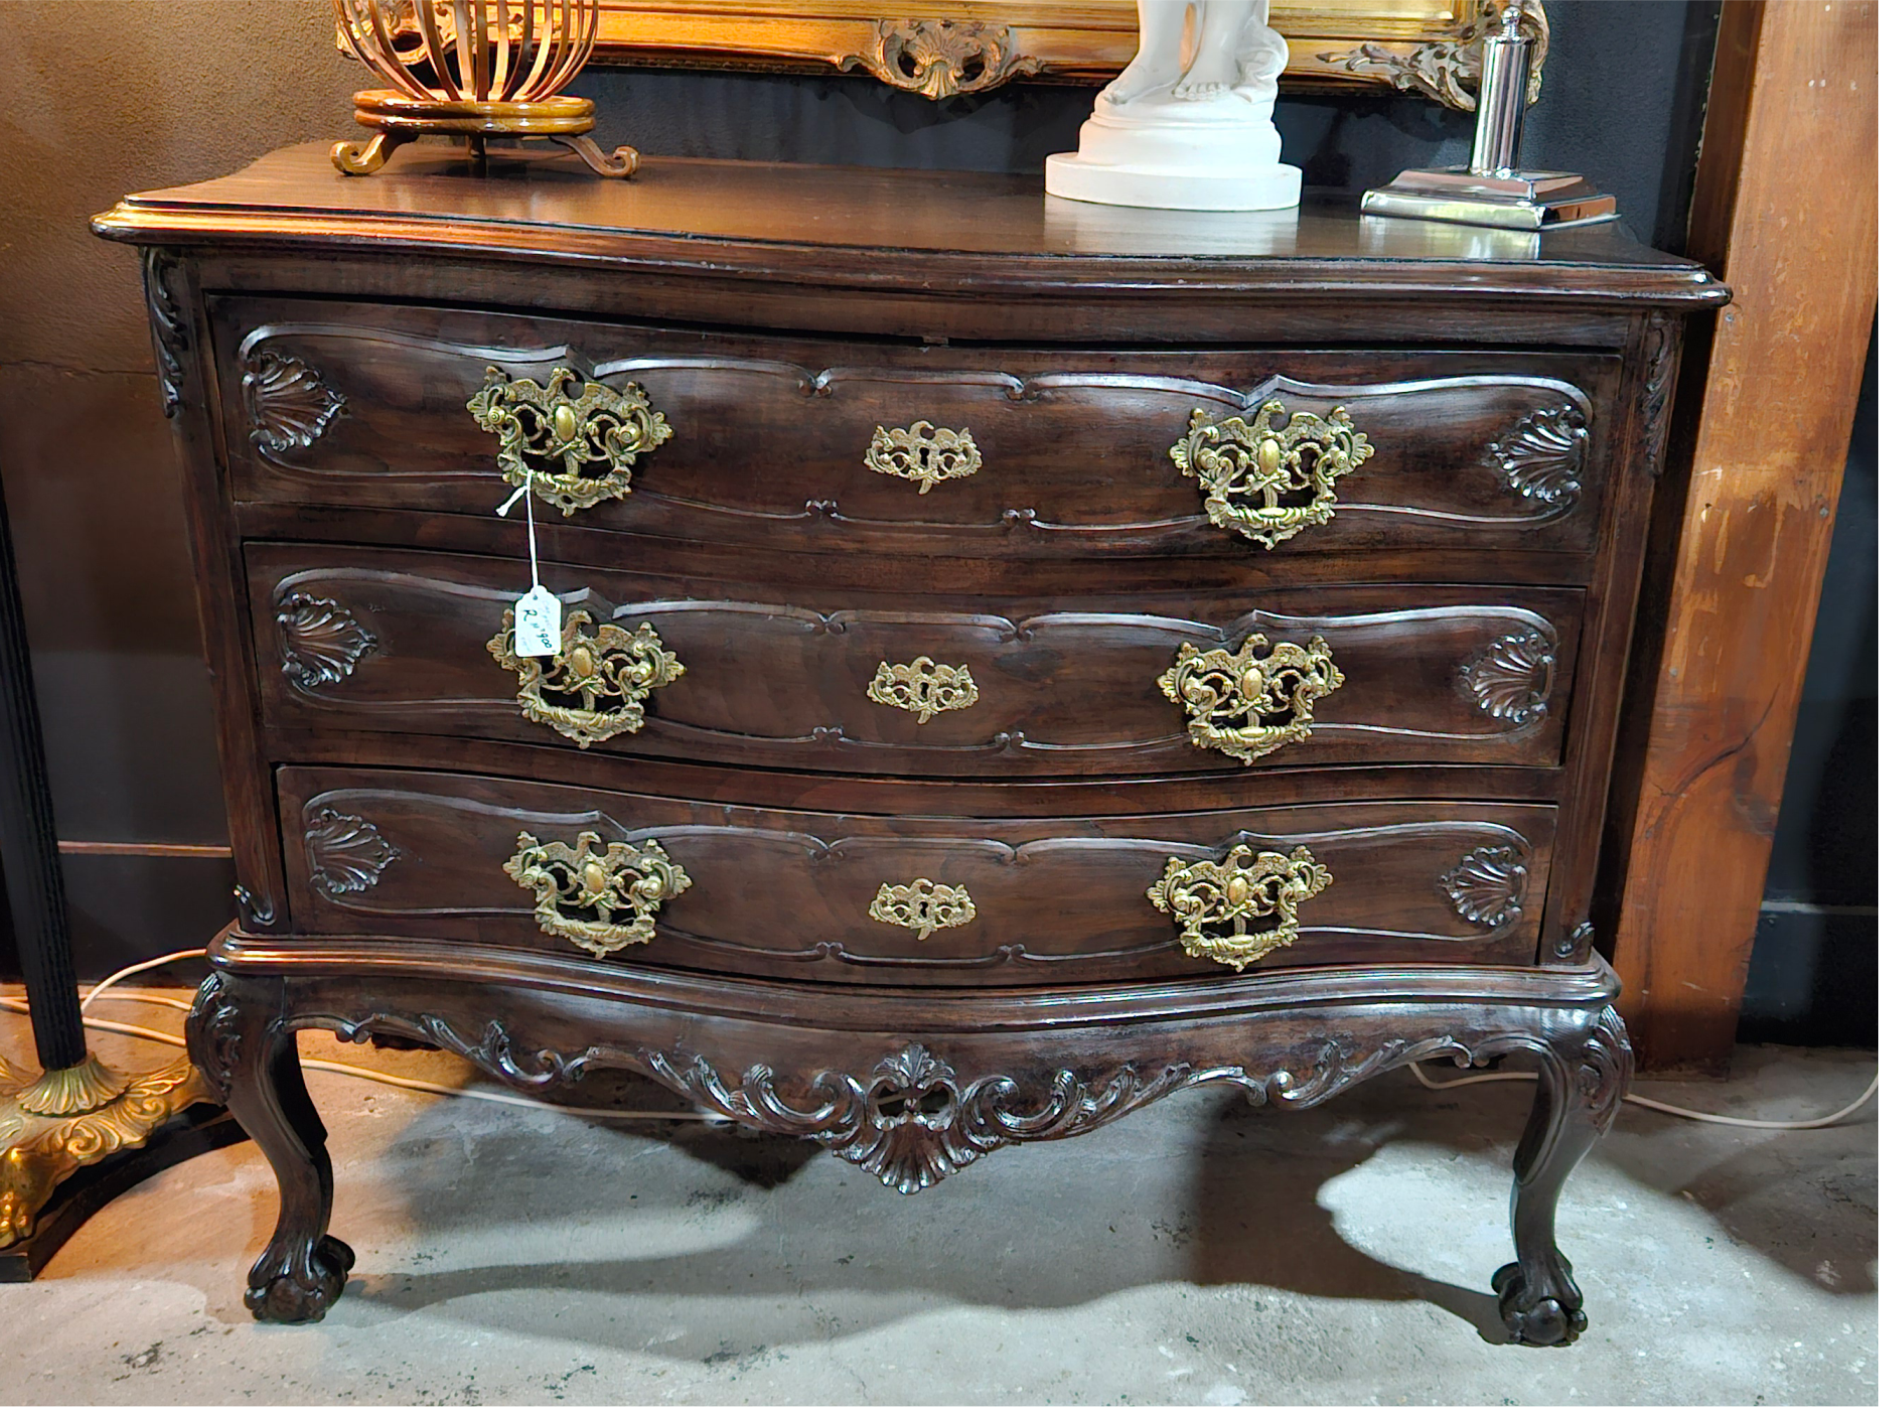 Objects - Antiques - Parkhurst - Johannesburg -Landing Page - South Africa - Fine Antiques - Decor Accents - Contact us - AntiquesandObjects.com - English Oak Chest of Drawers